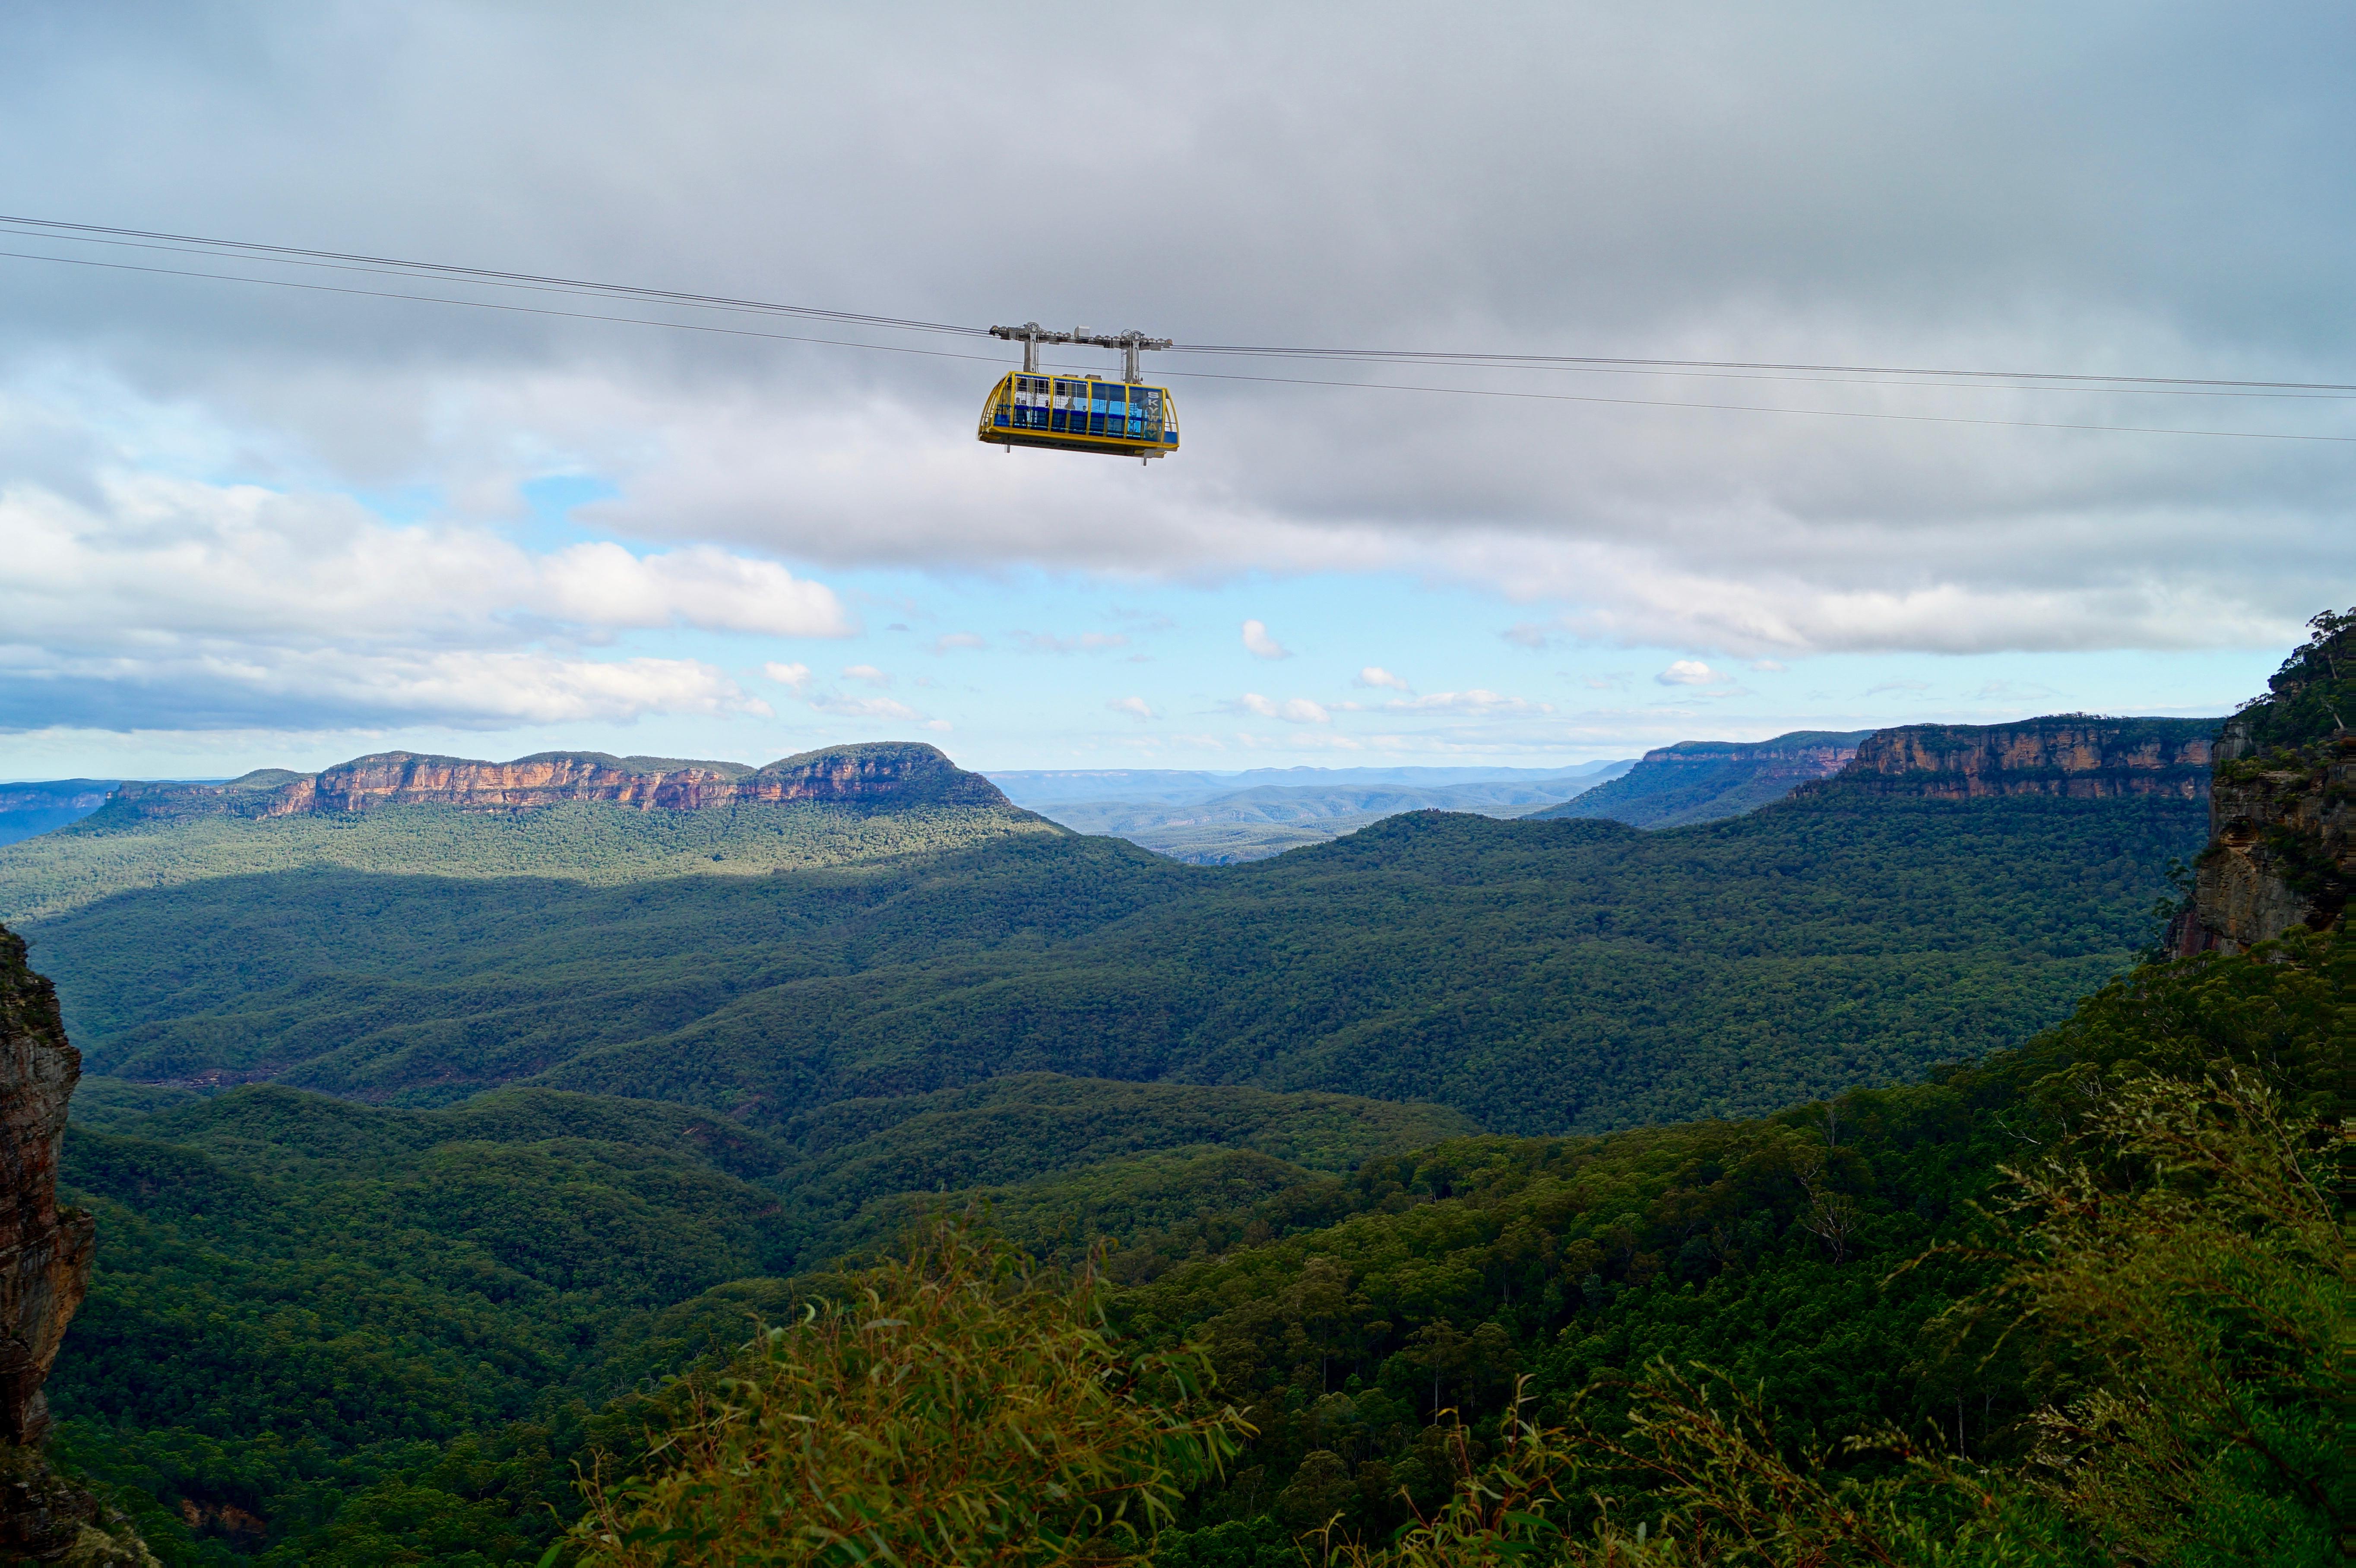 White Zip Line Bus Above on Image. Free Stock